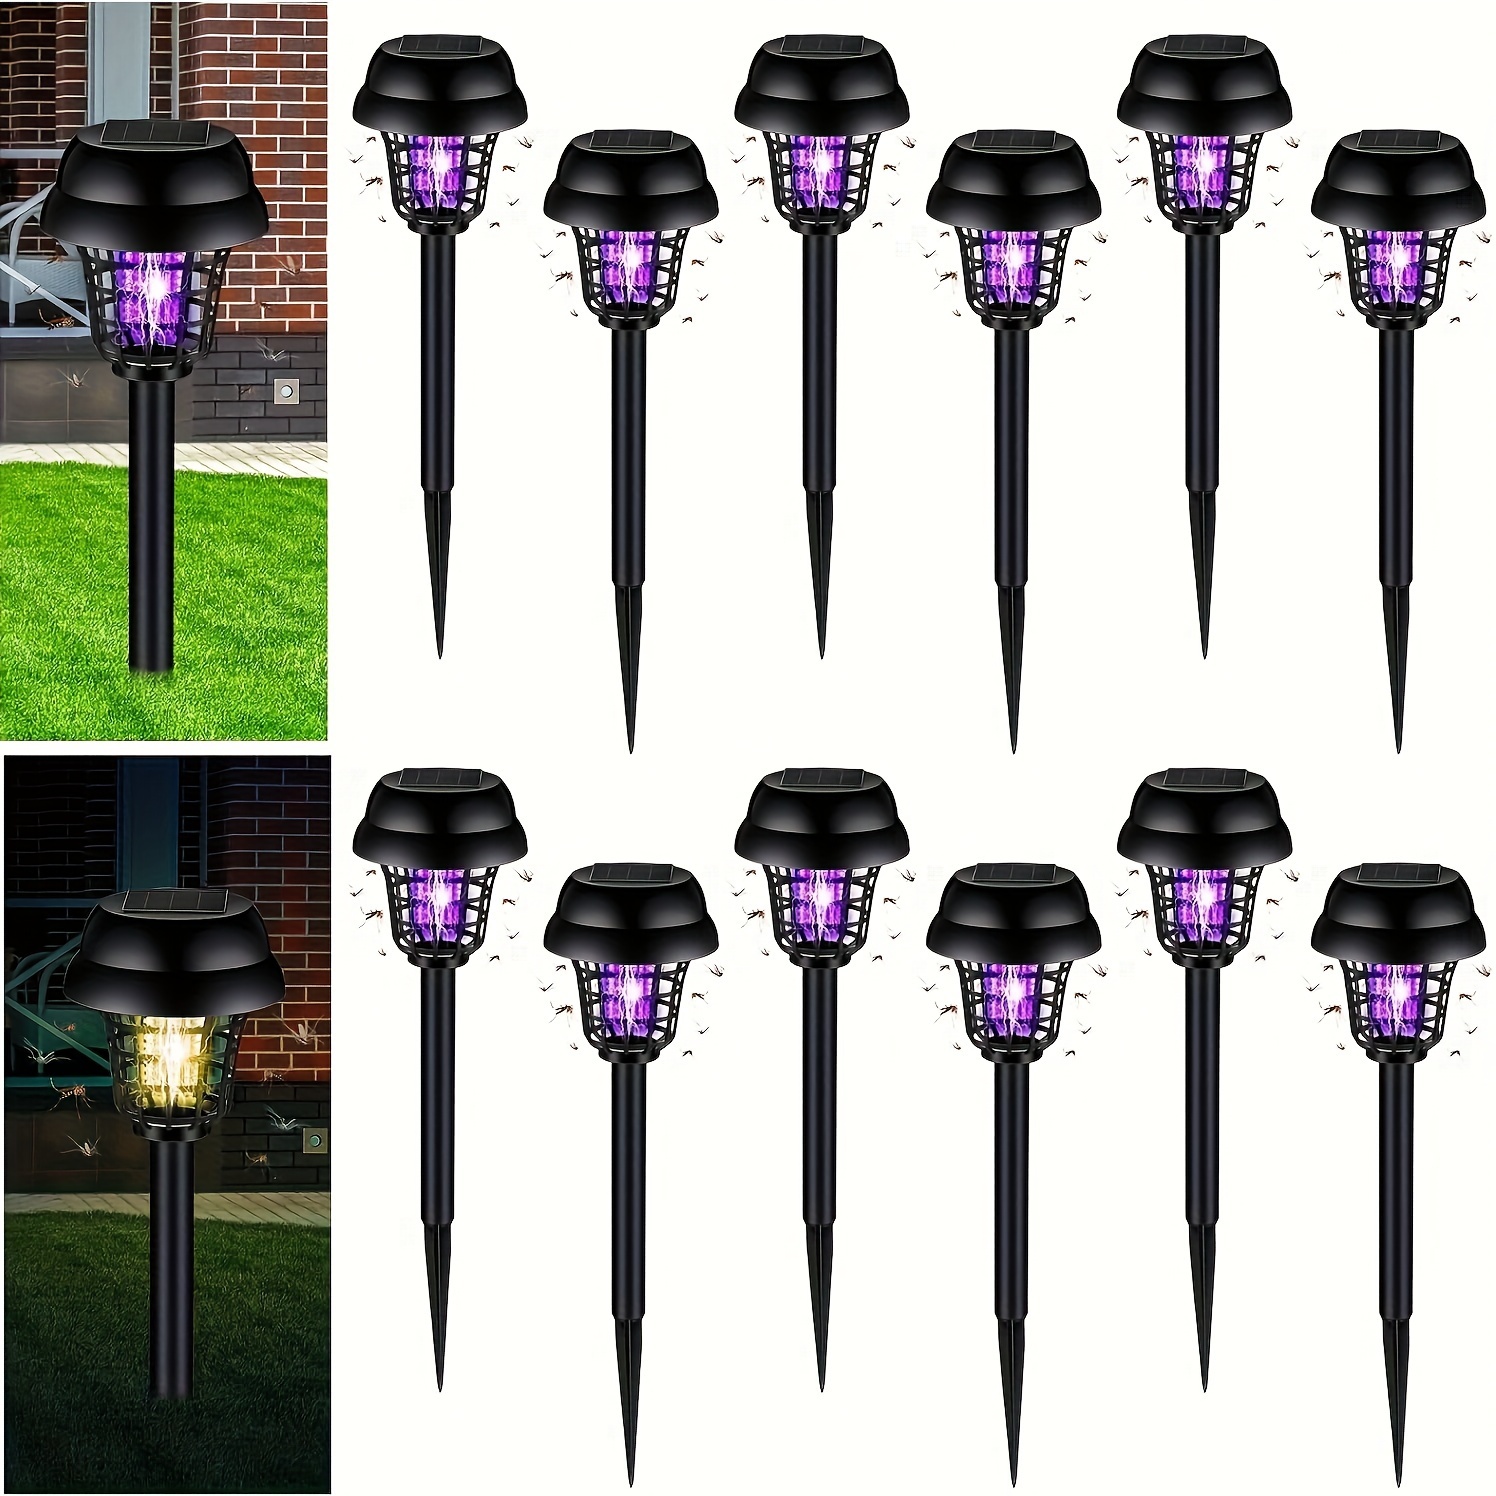 

2-pack Solar Powered Bug Zapper - Outdoor Mosquito Killer Lamp - Plastic Path Lights With Foldable Sconce, Push Button Control & Nickel Battery - Semi Flush Mount Fixture For Patio, Yard & Garden